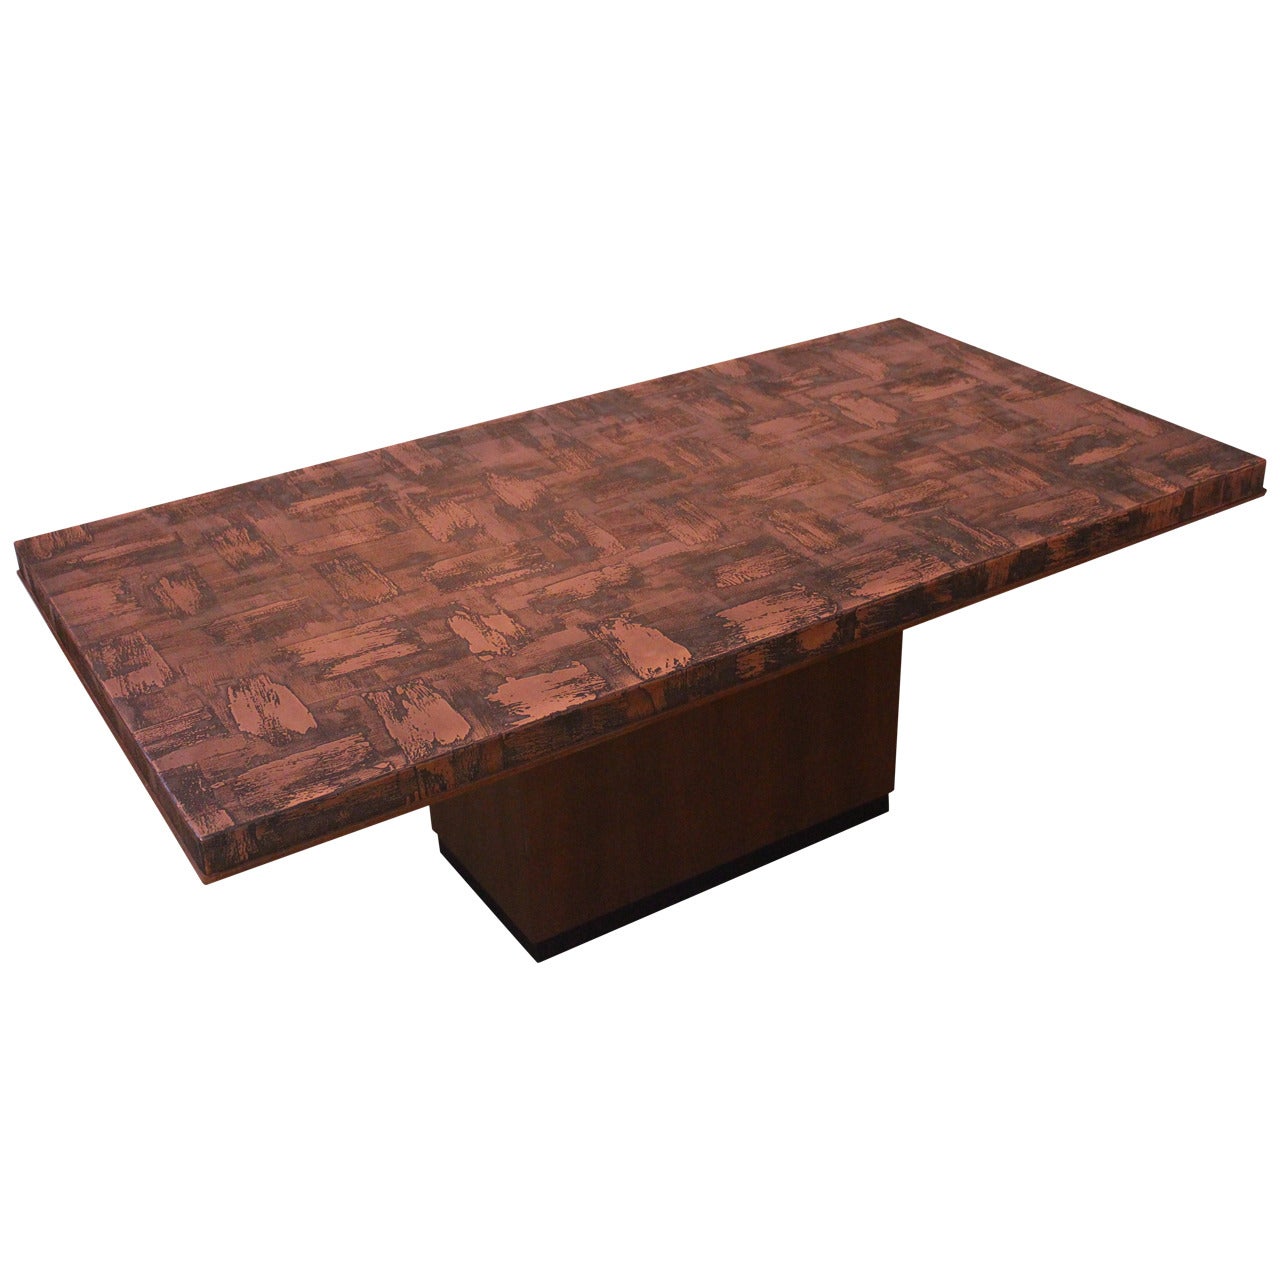 Interesting Brutalist Style, Acid Washed, Copper Patina Coffee Table, 1970 For Sale